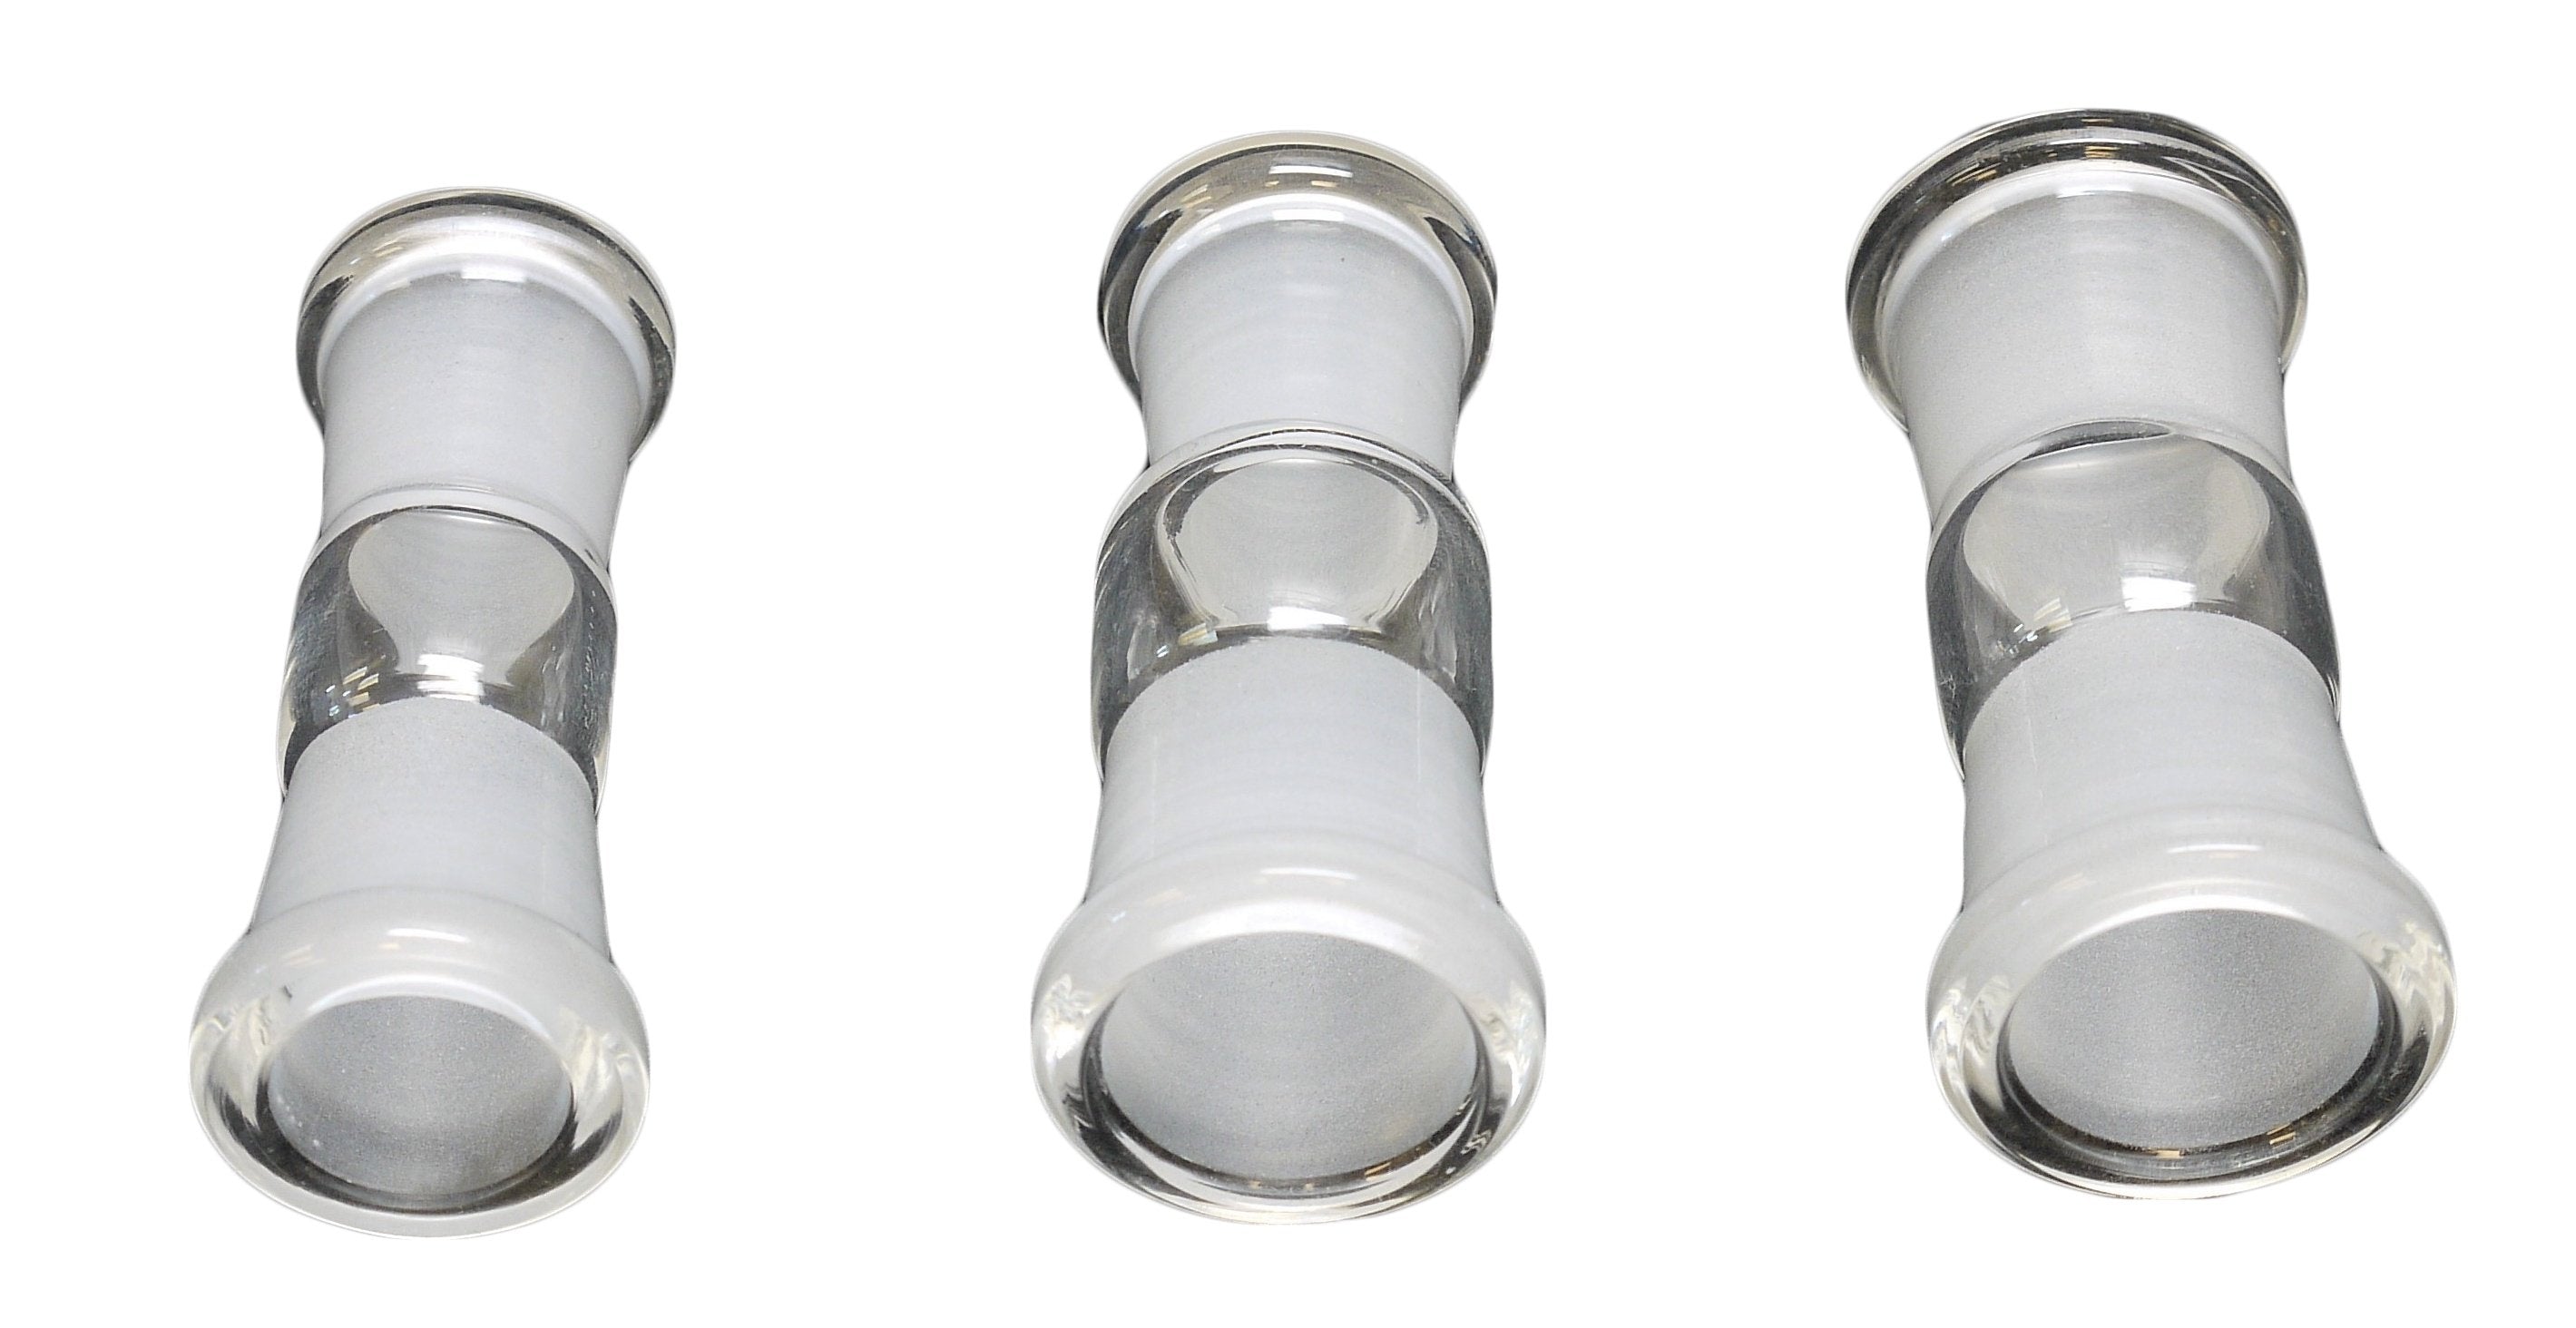 Female to Female connector (14mm to 19mm)